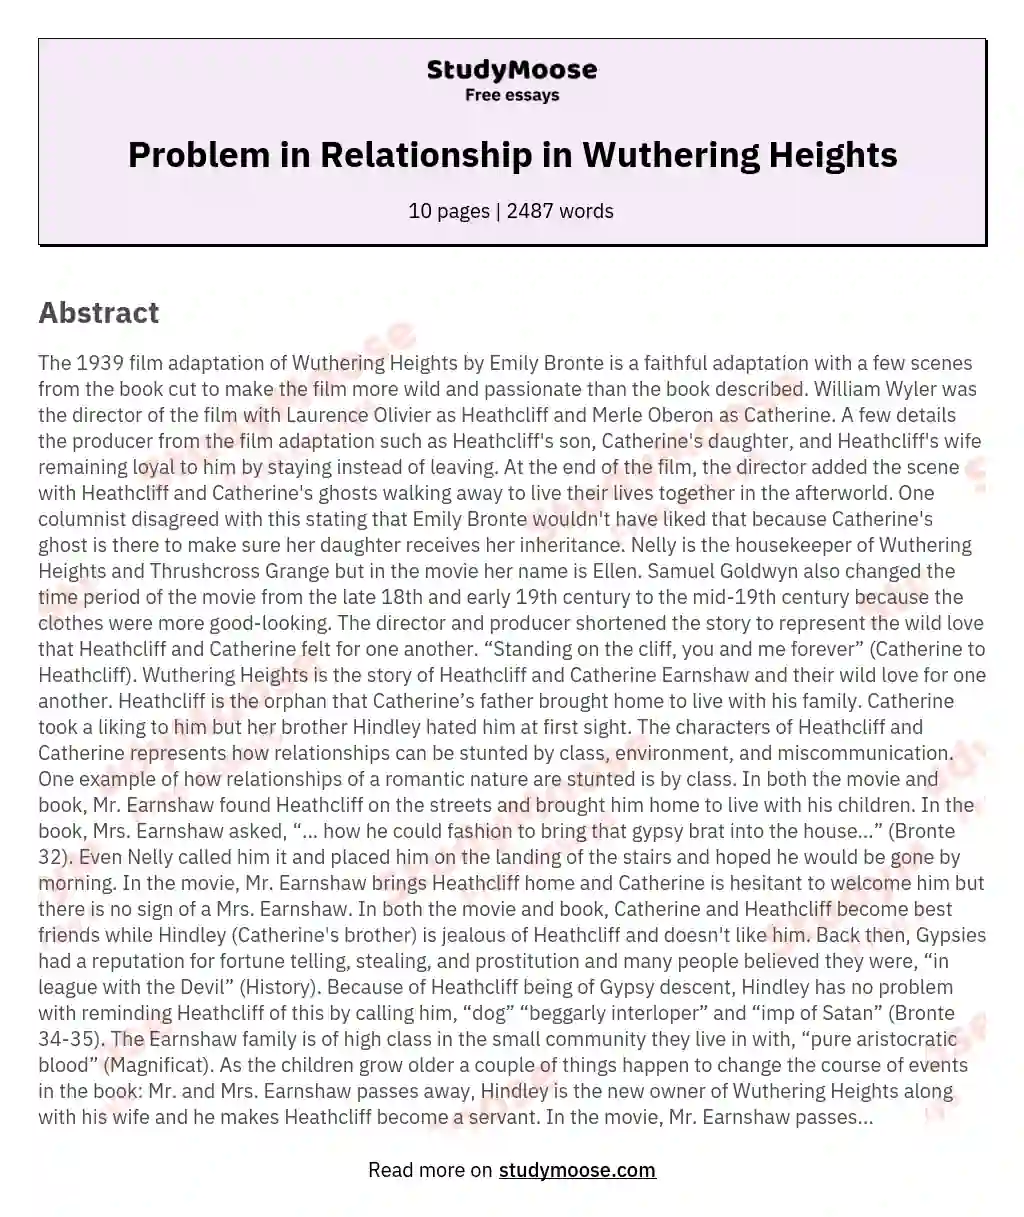 Problem in Relationship in Wuthering Heights